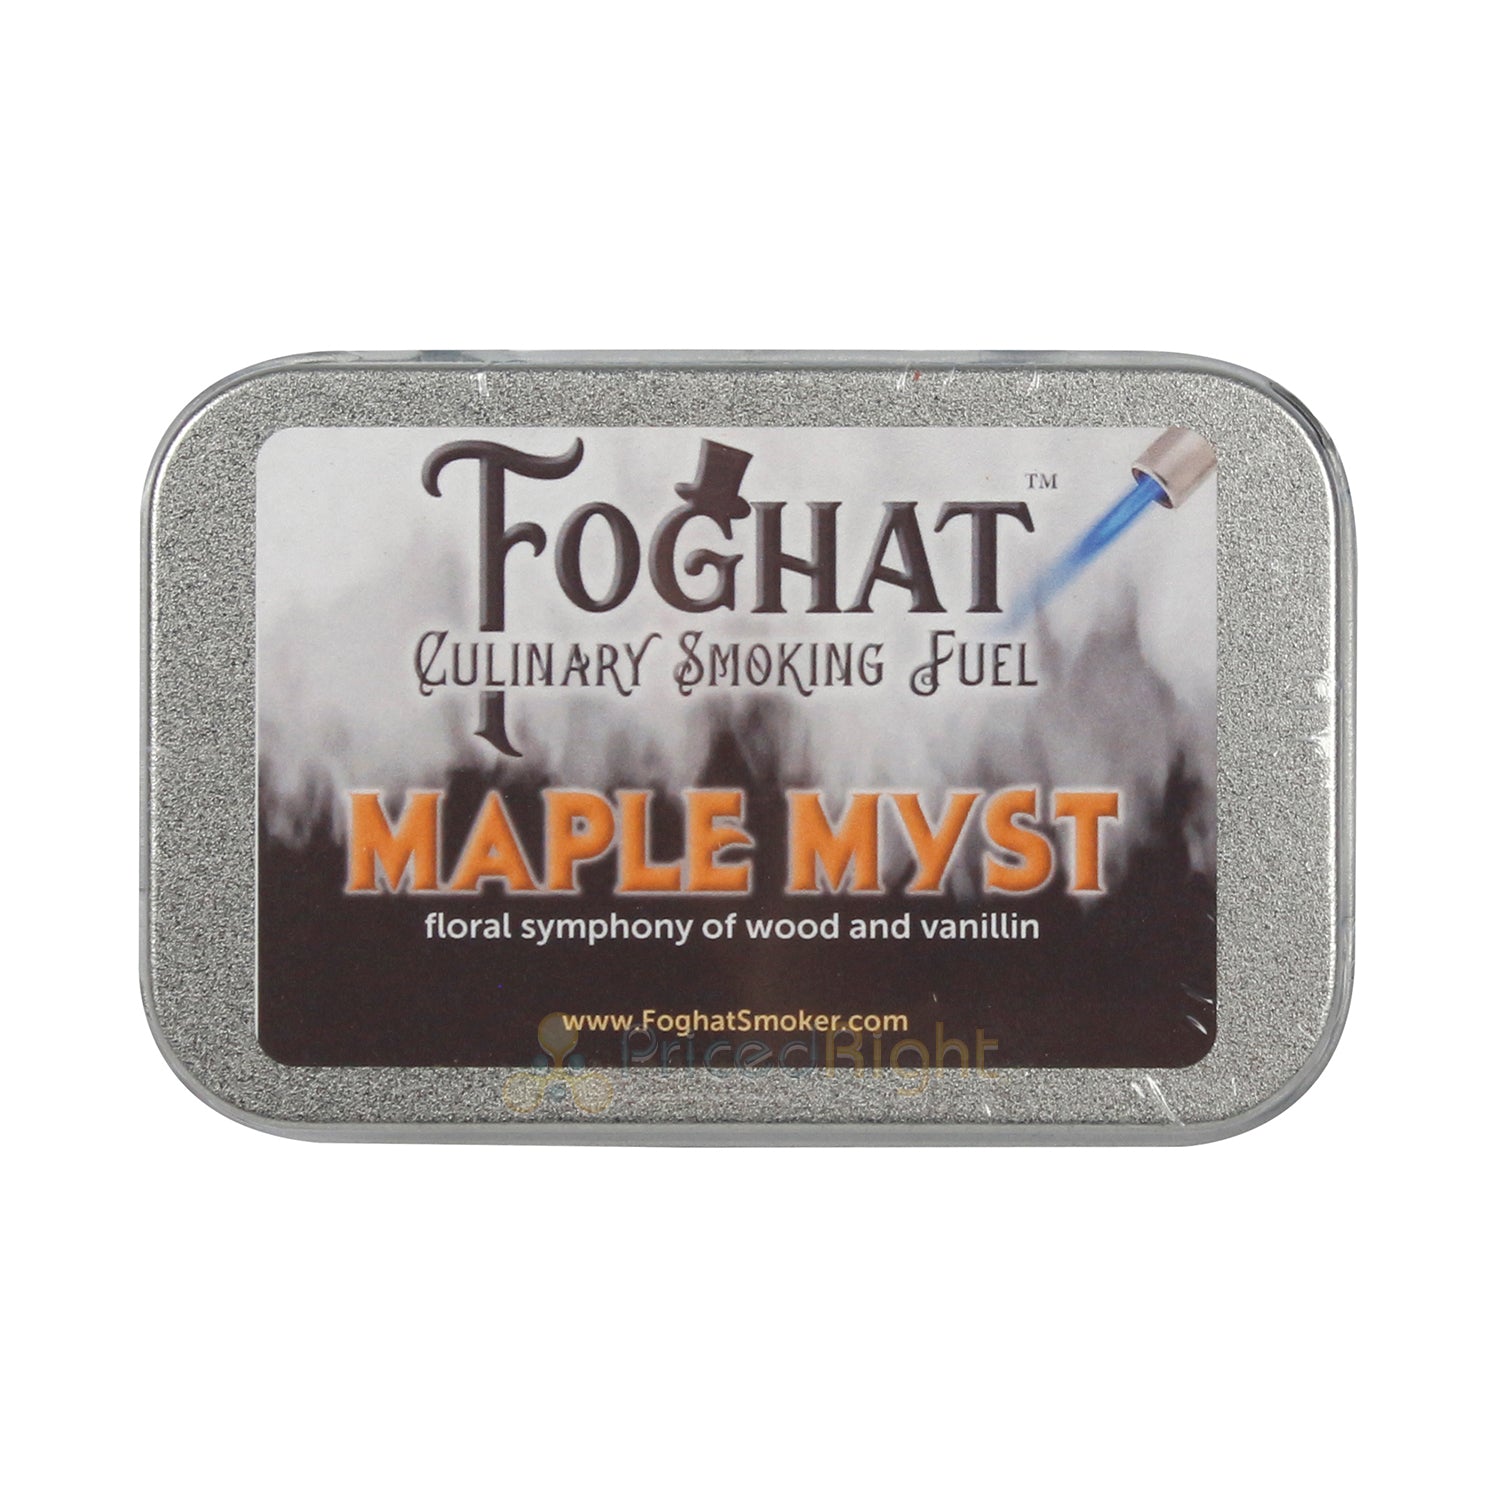 Foghat Culinary Smoking Fuel Maple Myst Floral & Vanilla All-Natural 4 Ounce